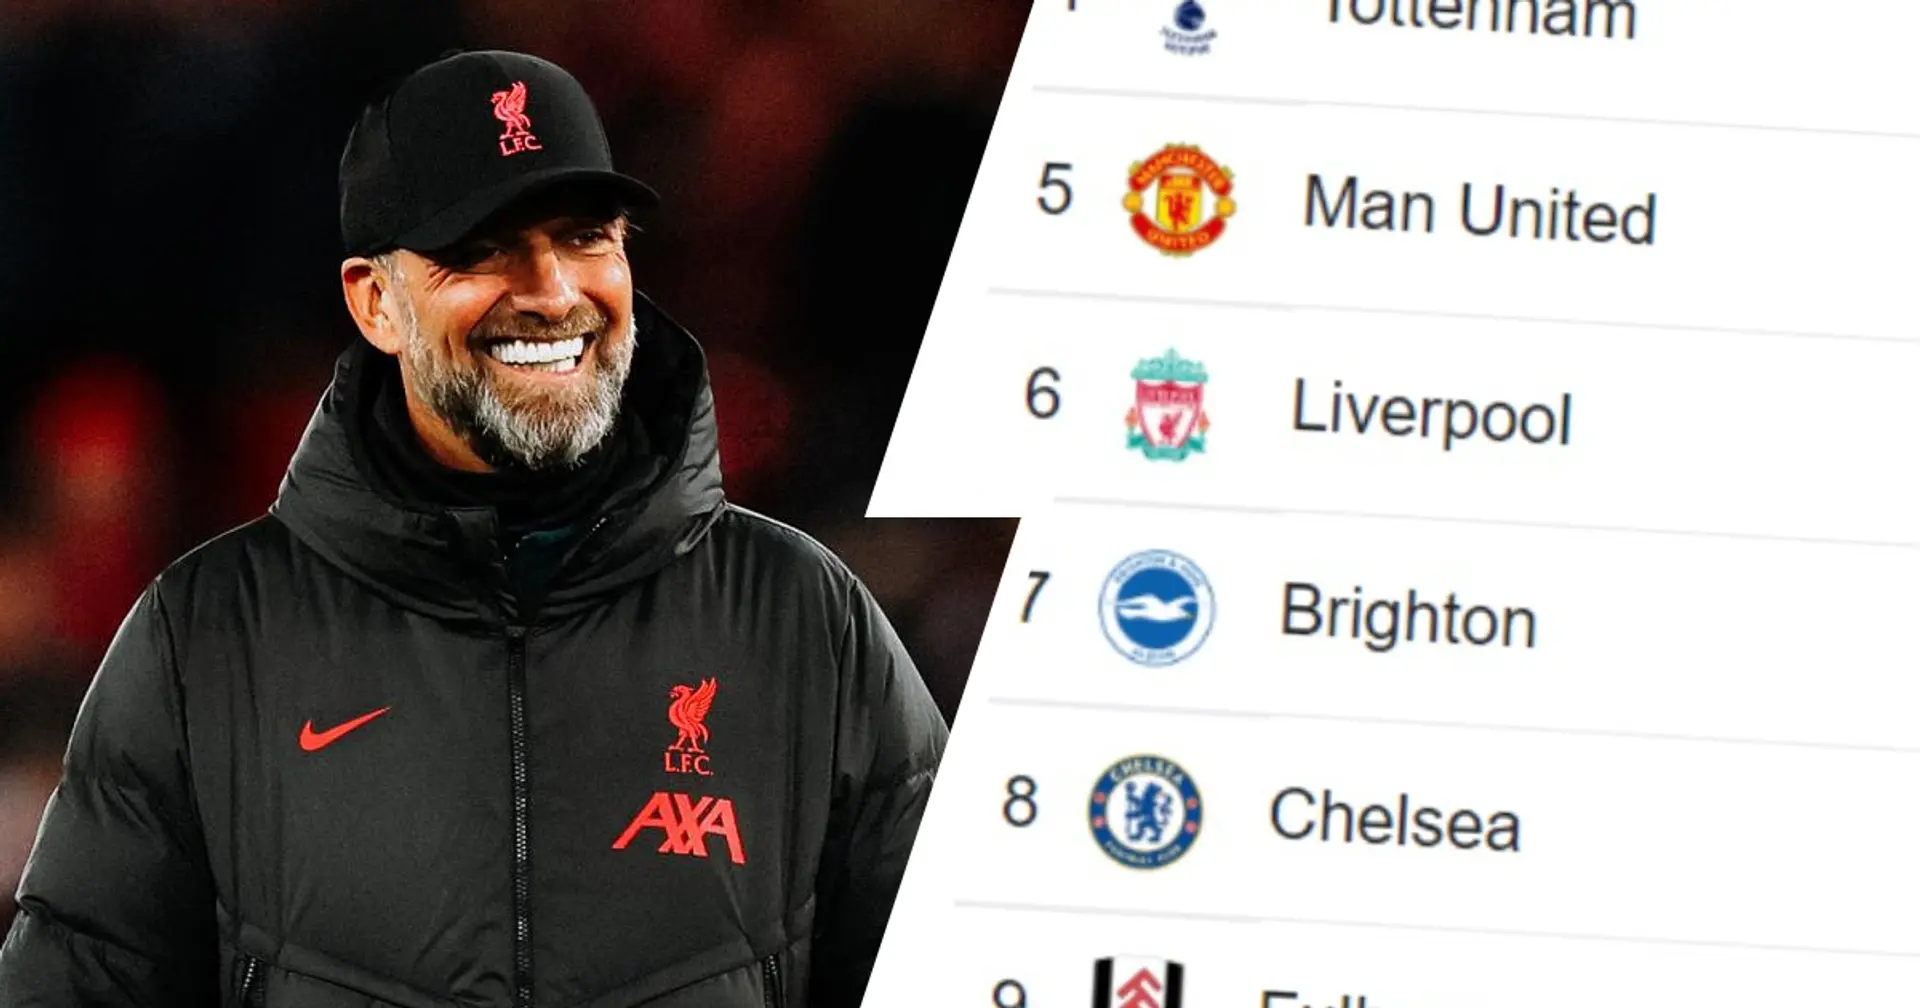 Liverpool up to sixth: Premier League table after Southampton win